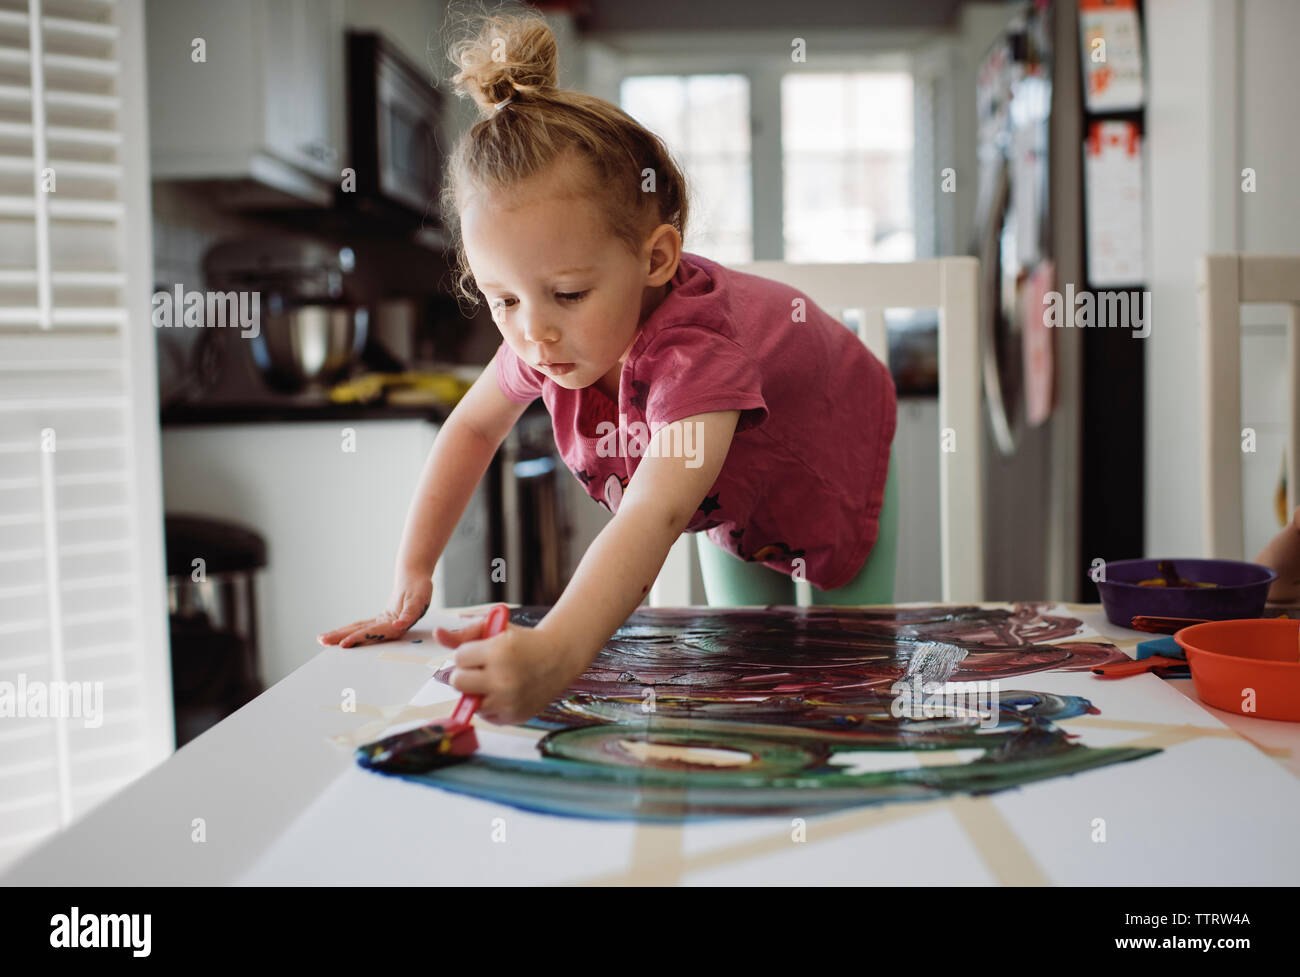 Girl painting on paper while standing by table at home Stock Photo